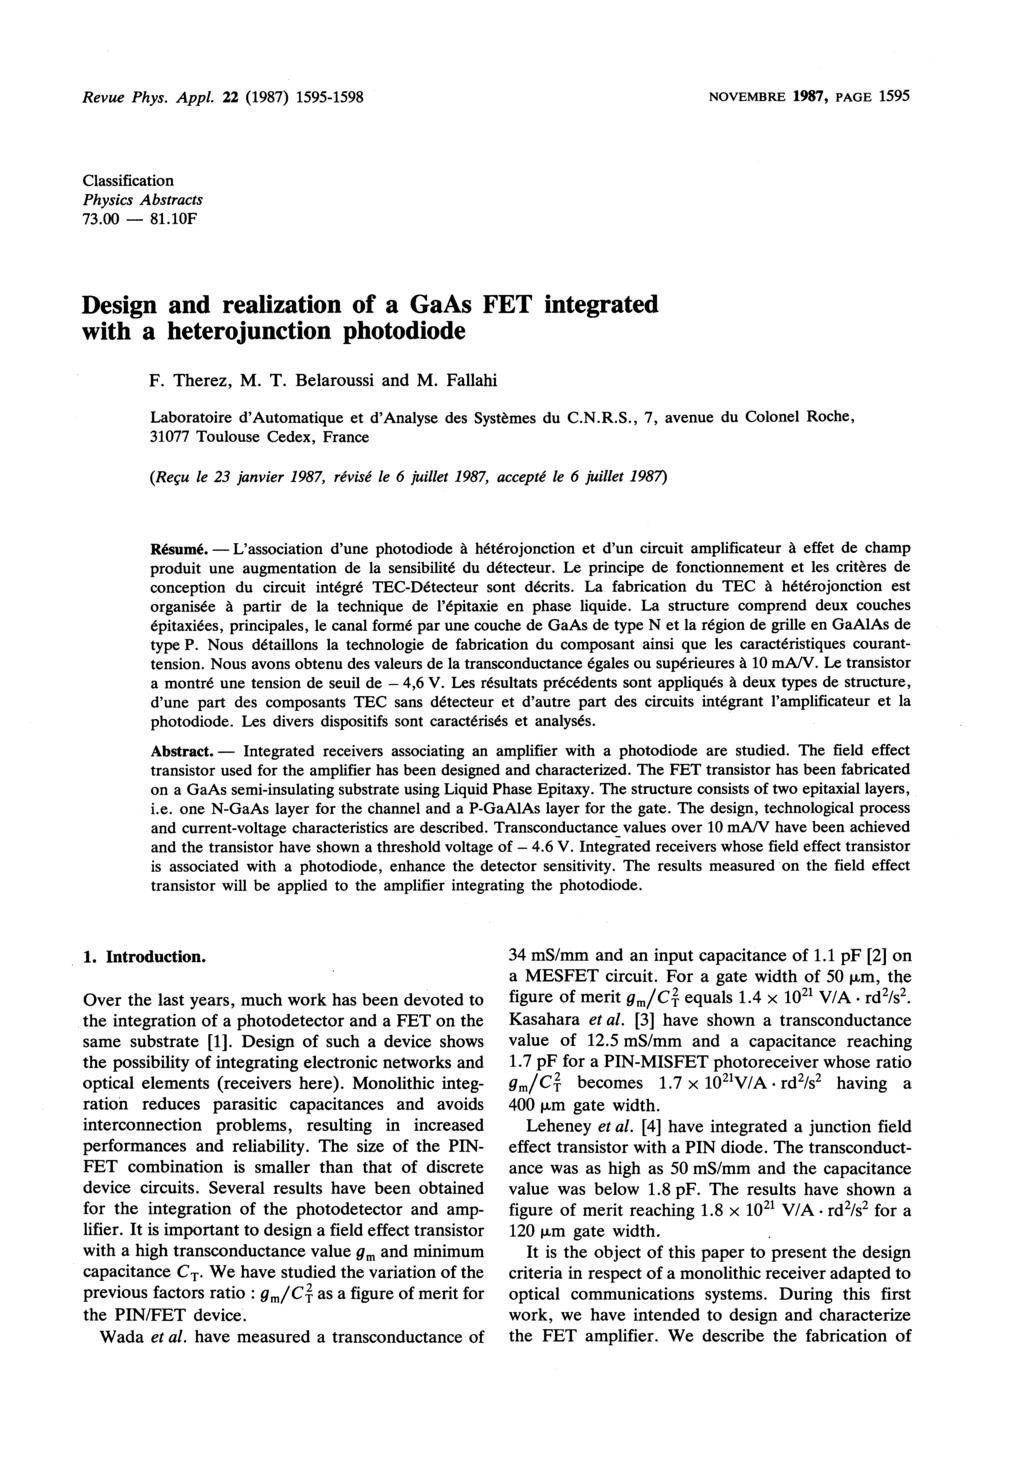 Integrated Revue Phys. Appl. 22 (1987) 15951598 NOVEMBRE 198 1595 Classification Physics Abstracts 73.00 81.10F Design and realization of a GaAs FET integrated with a heterojunction photodiode F.